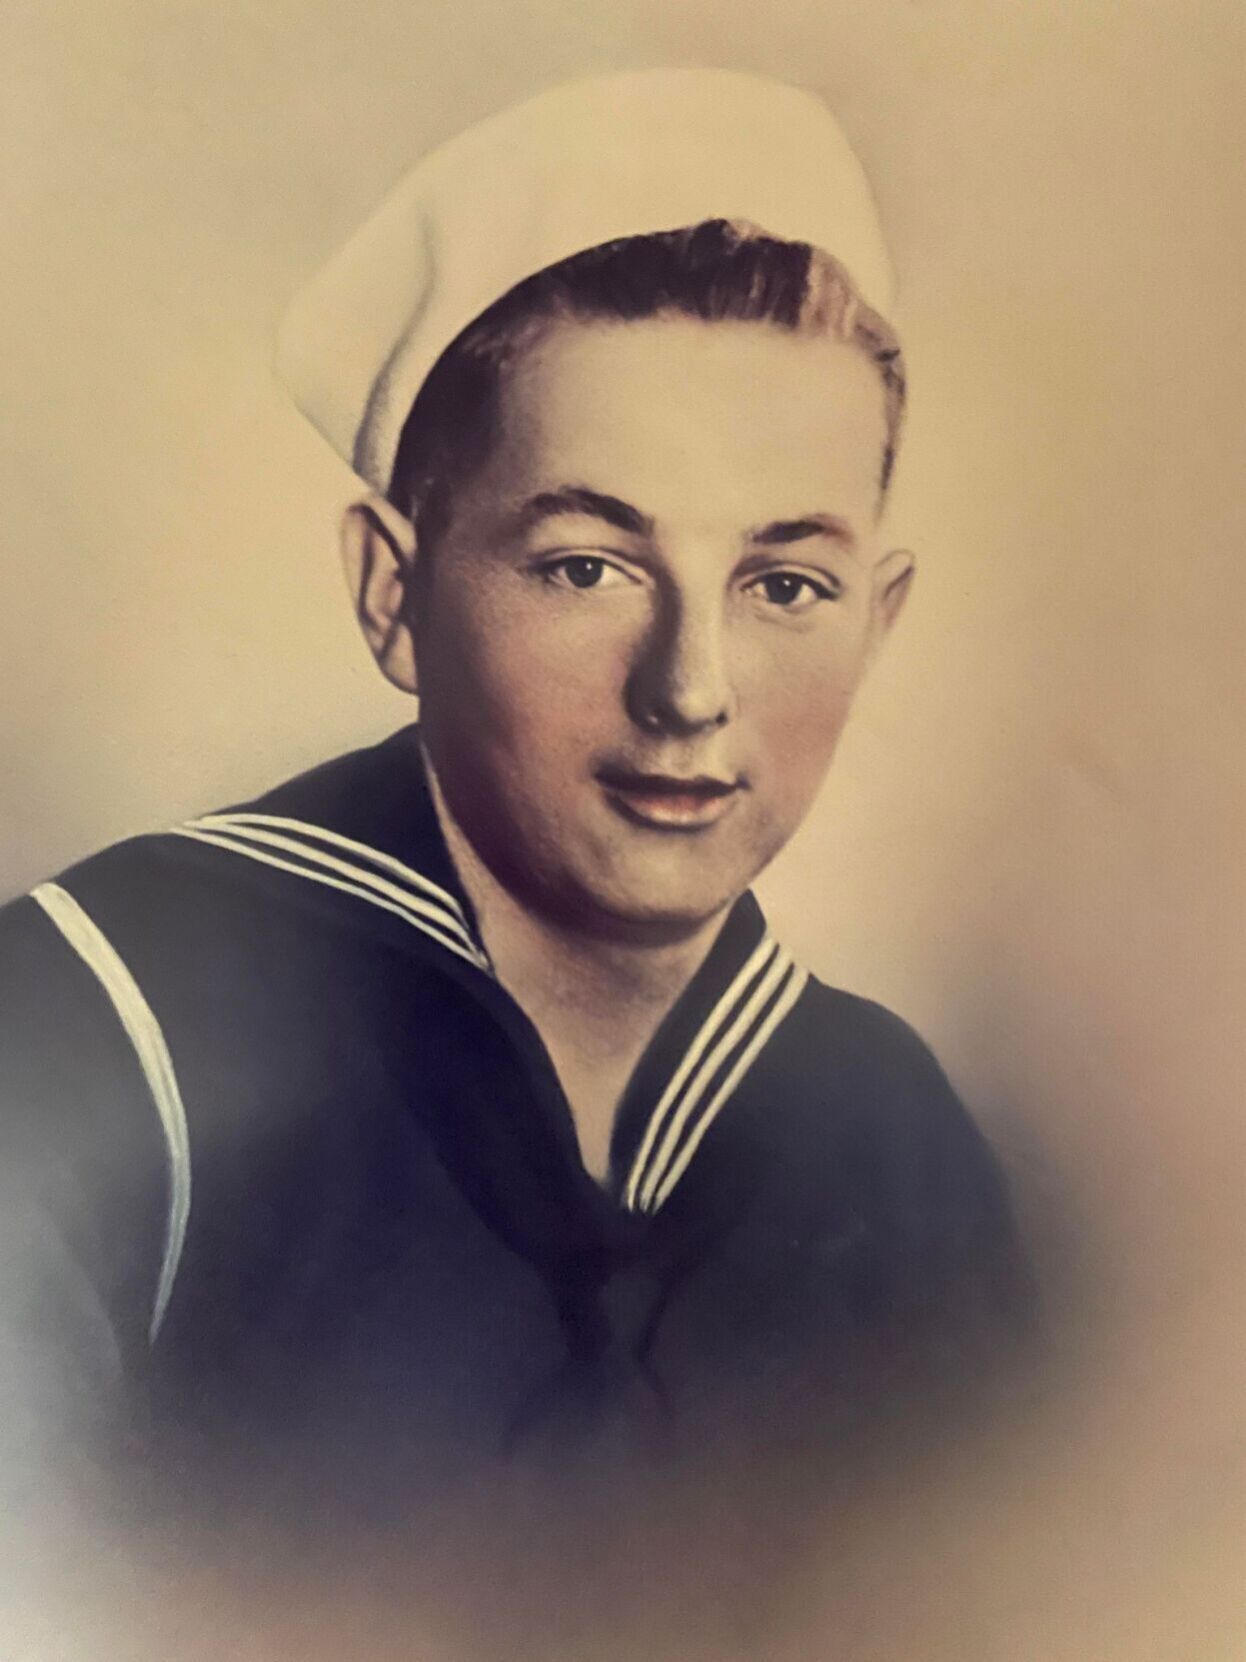 More than 82 years after Pearl Harbor, Arcola sailor Charles Darling Brown finally comes home